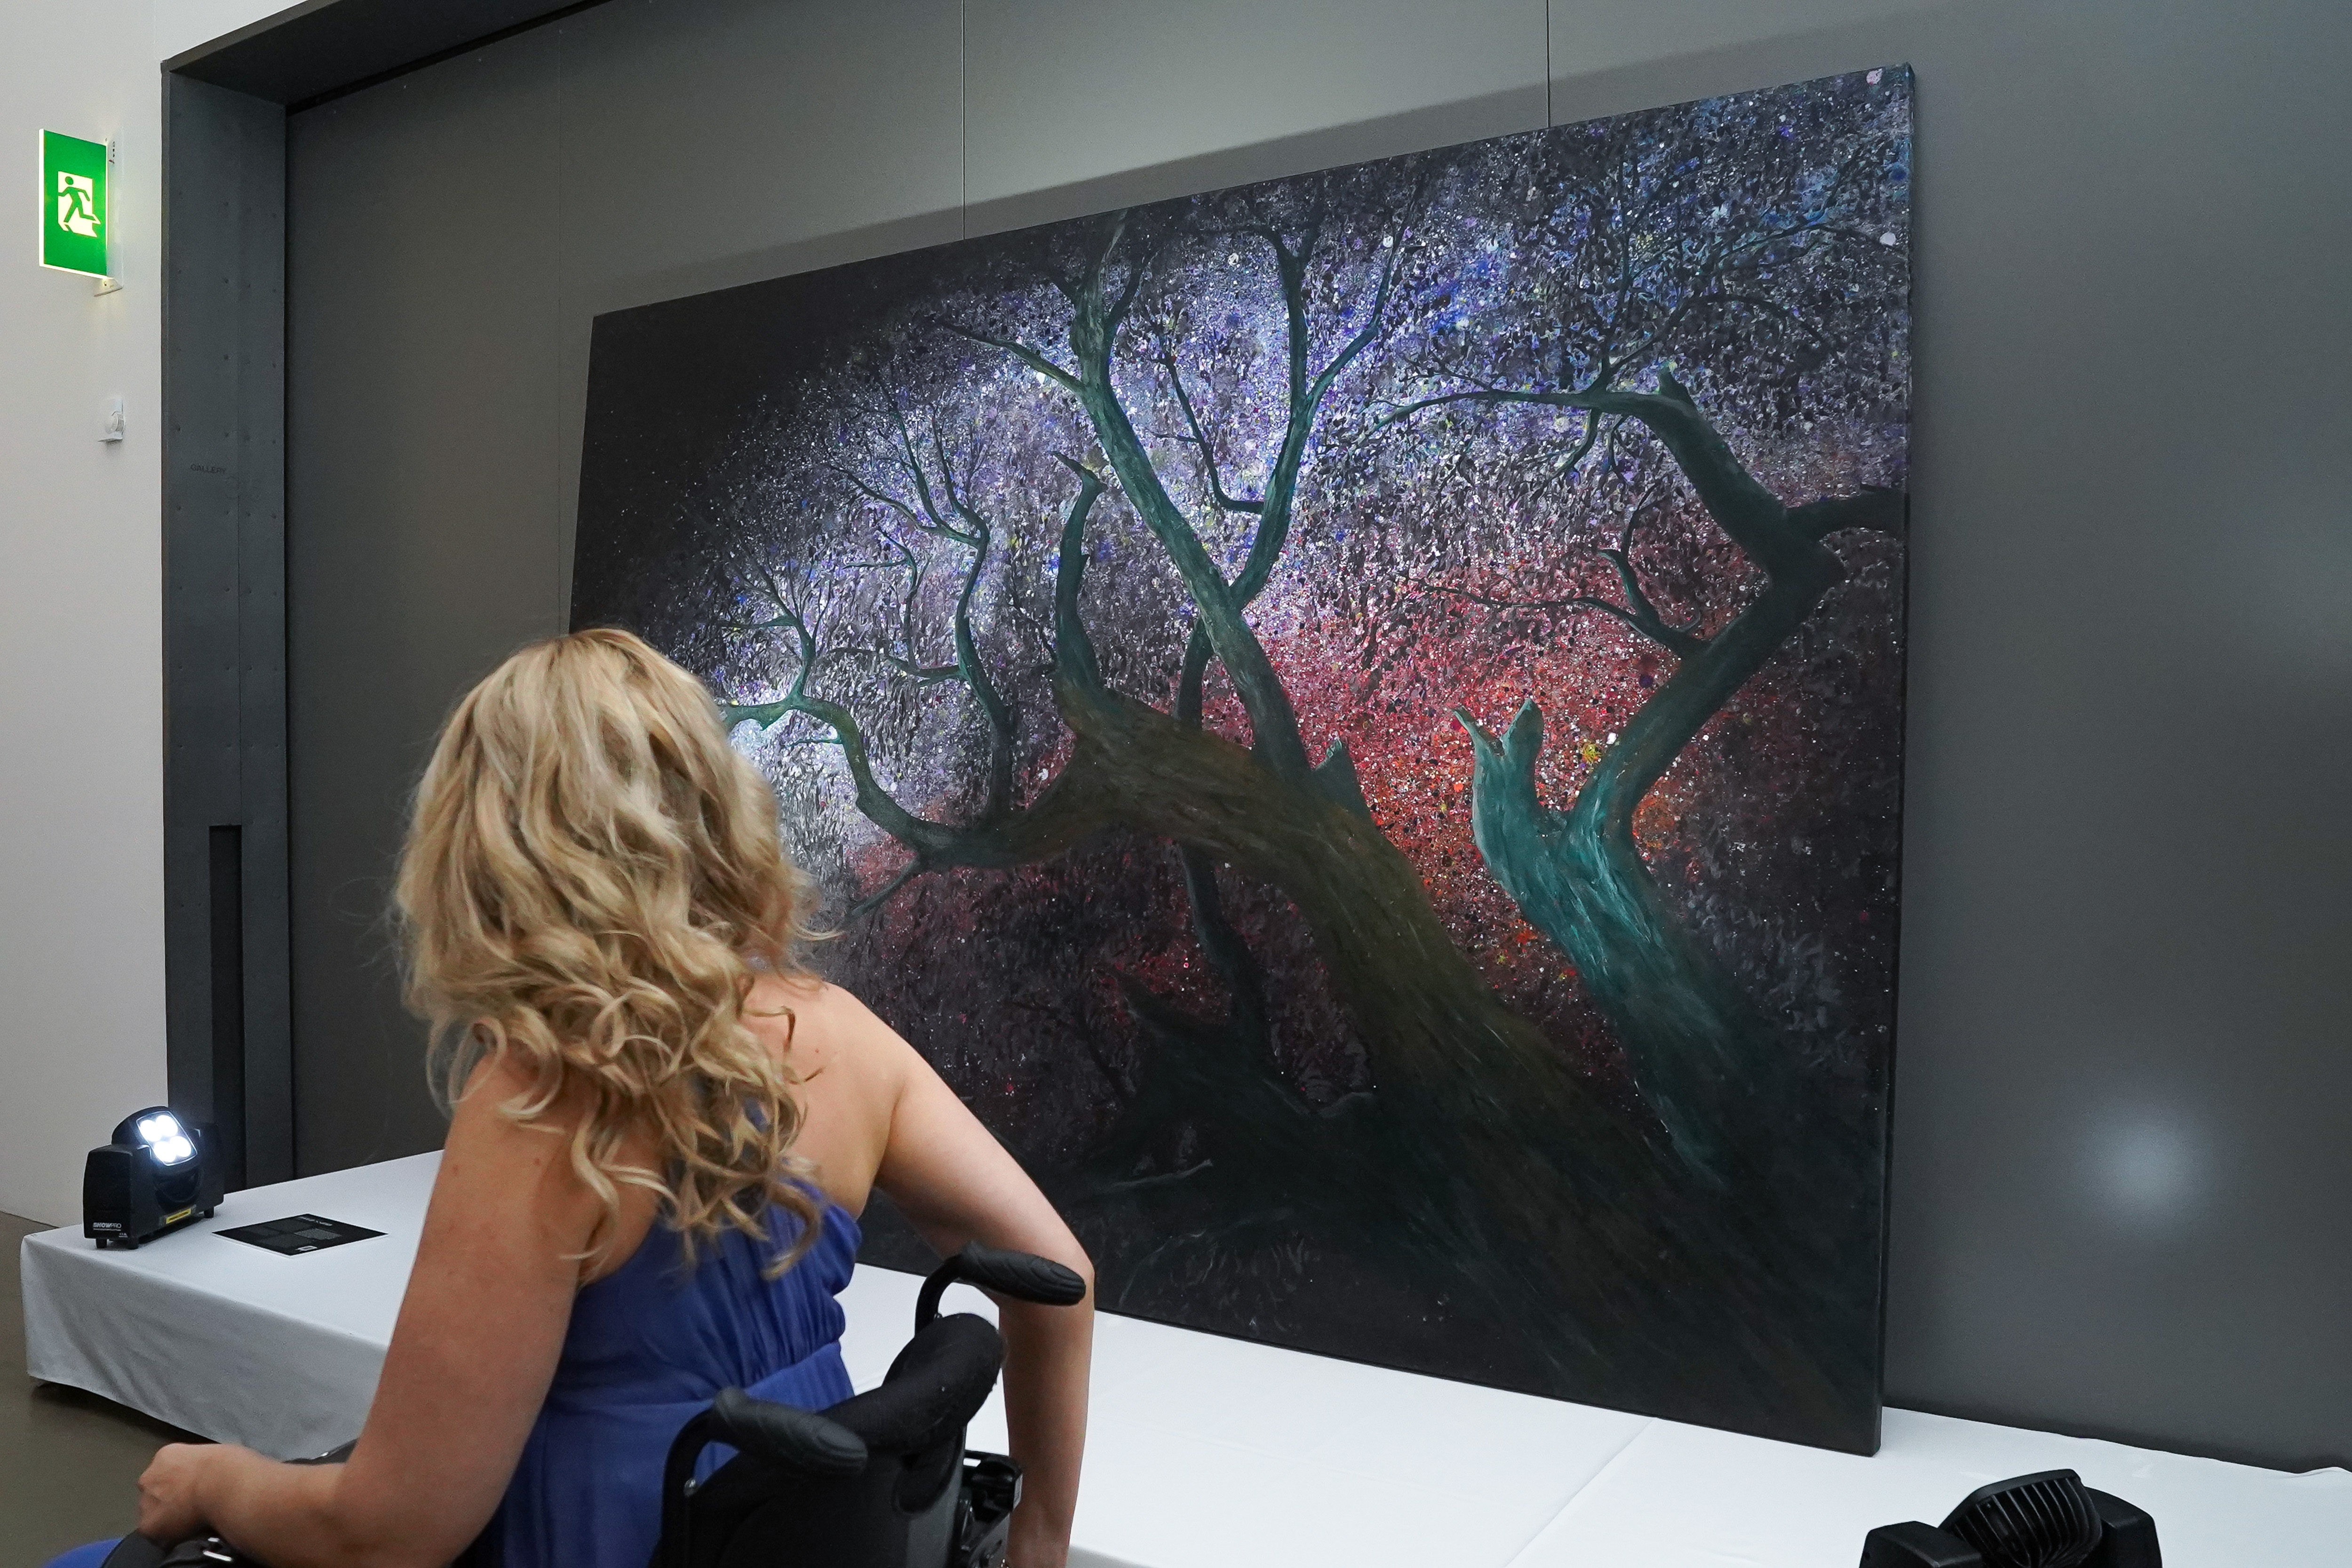 PRESS RELEASE: ‘Last Seen’ an art Exhibition to Save Sight, successfully launched by Queensland Eye Institute Foundation